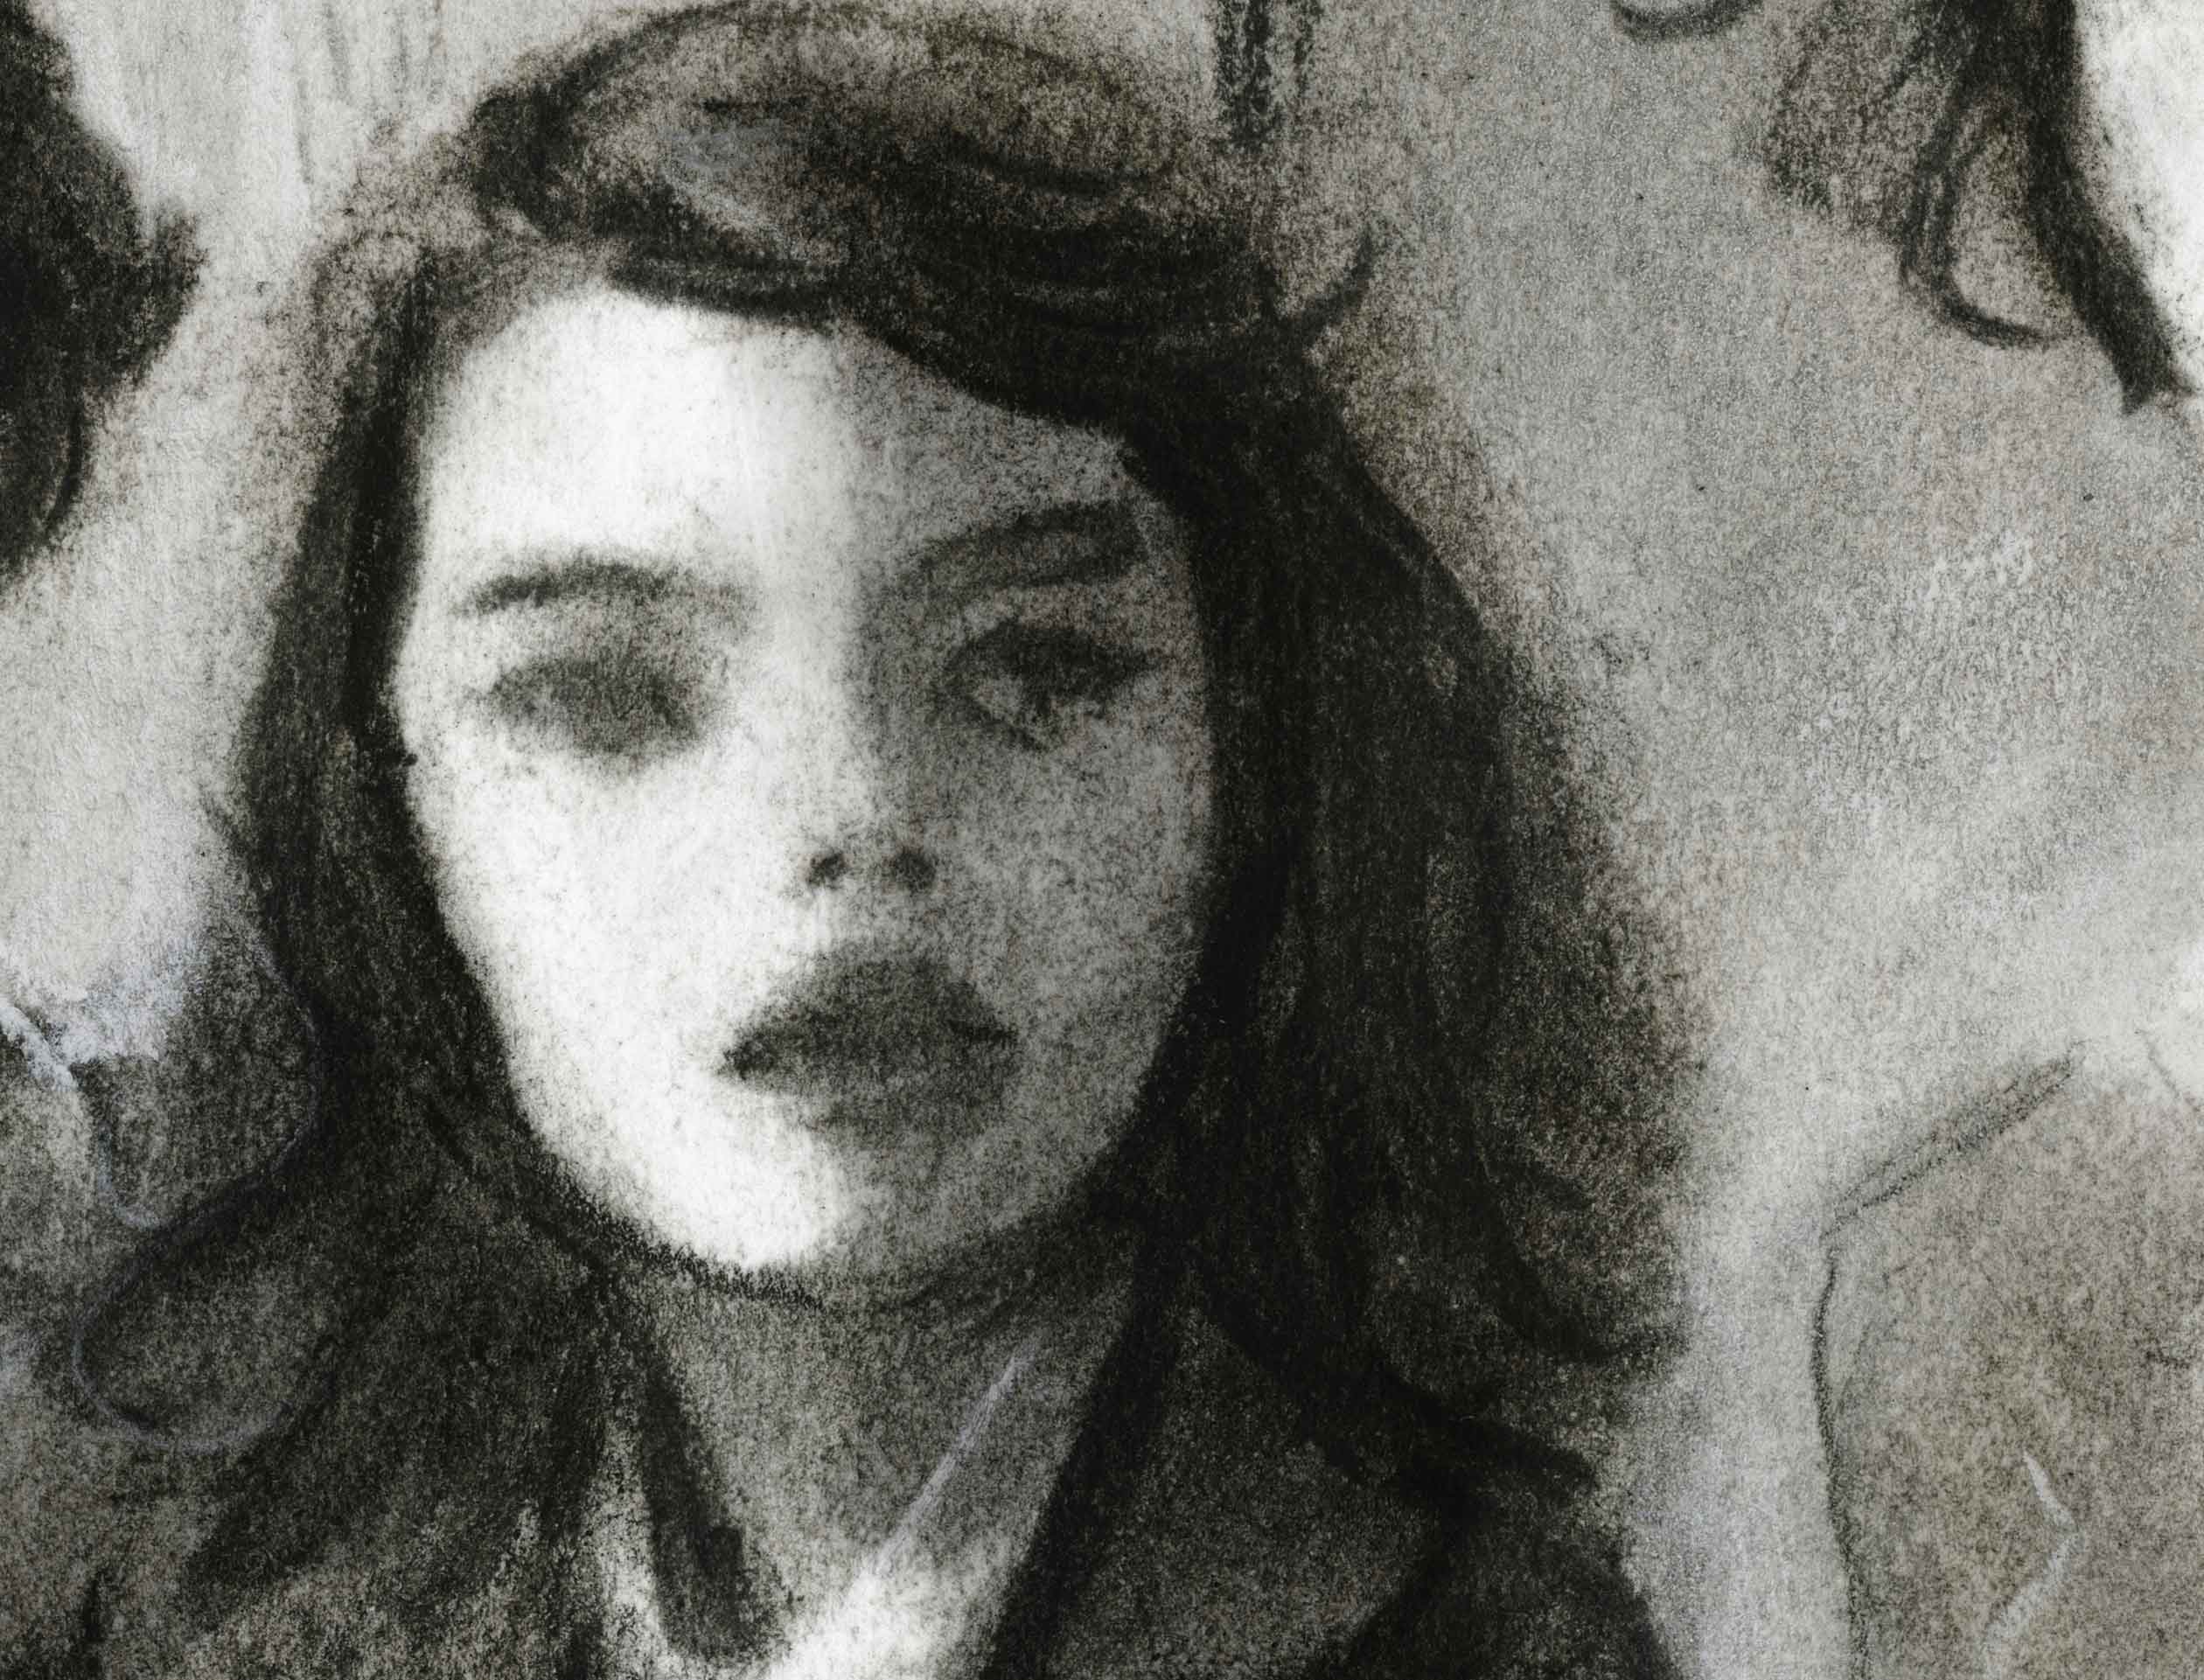 Detail shot 1 of girls face from Charcoal Sketch of 3 school girls from the 1940s life magazine